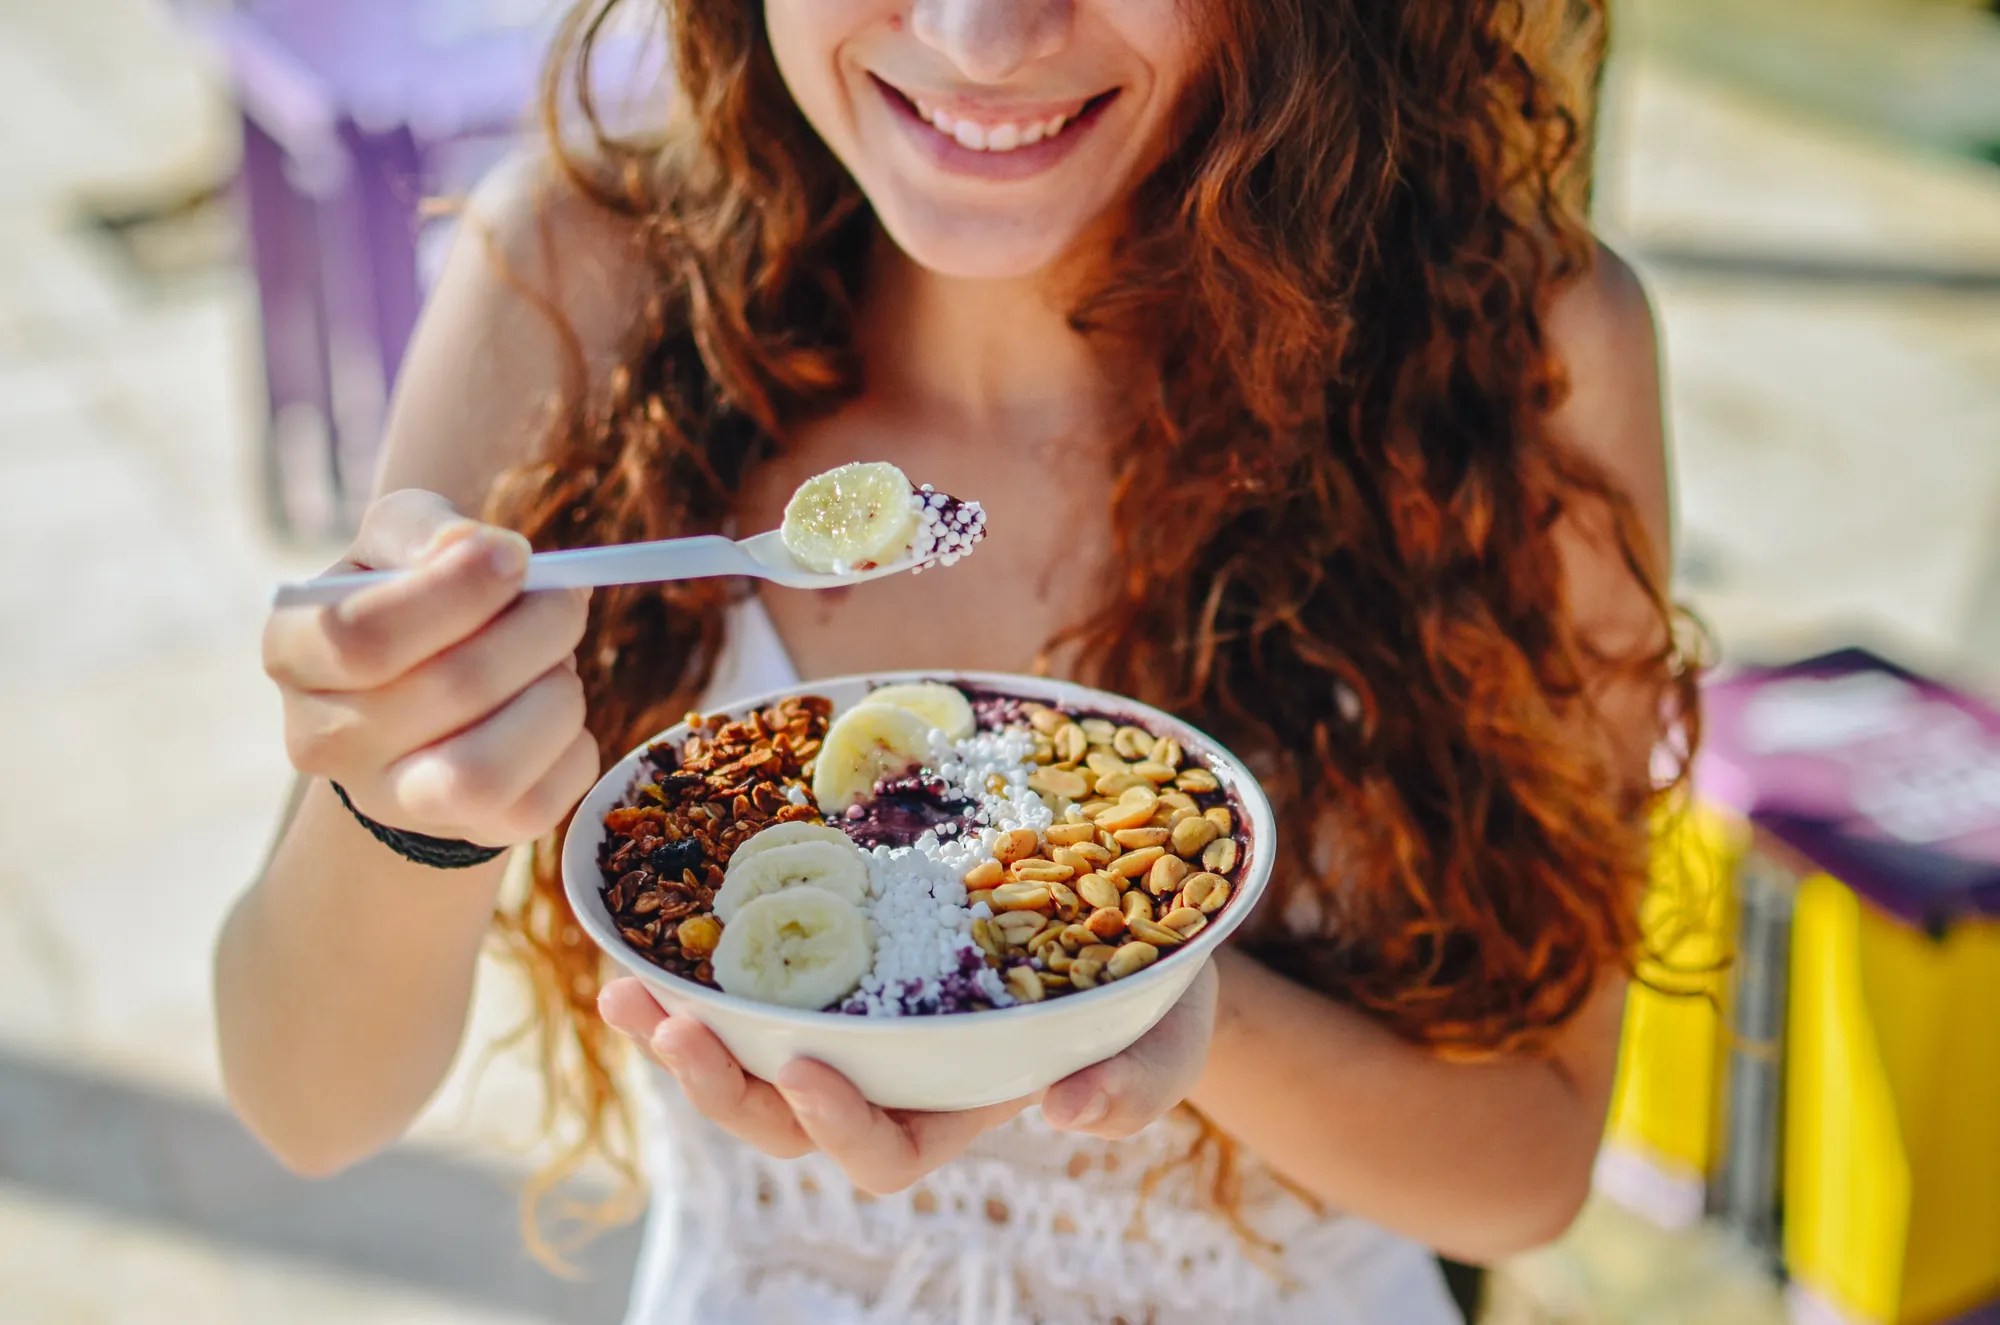 How To Gain Weight On A Vegan Diet—As Told By An Expert